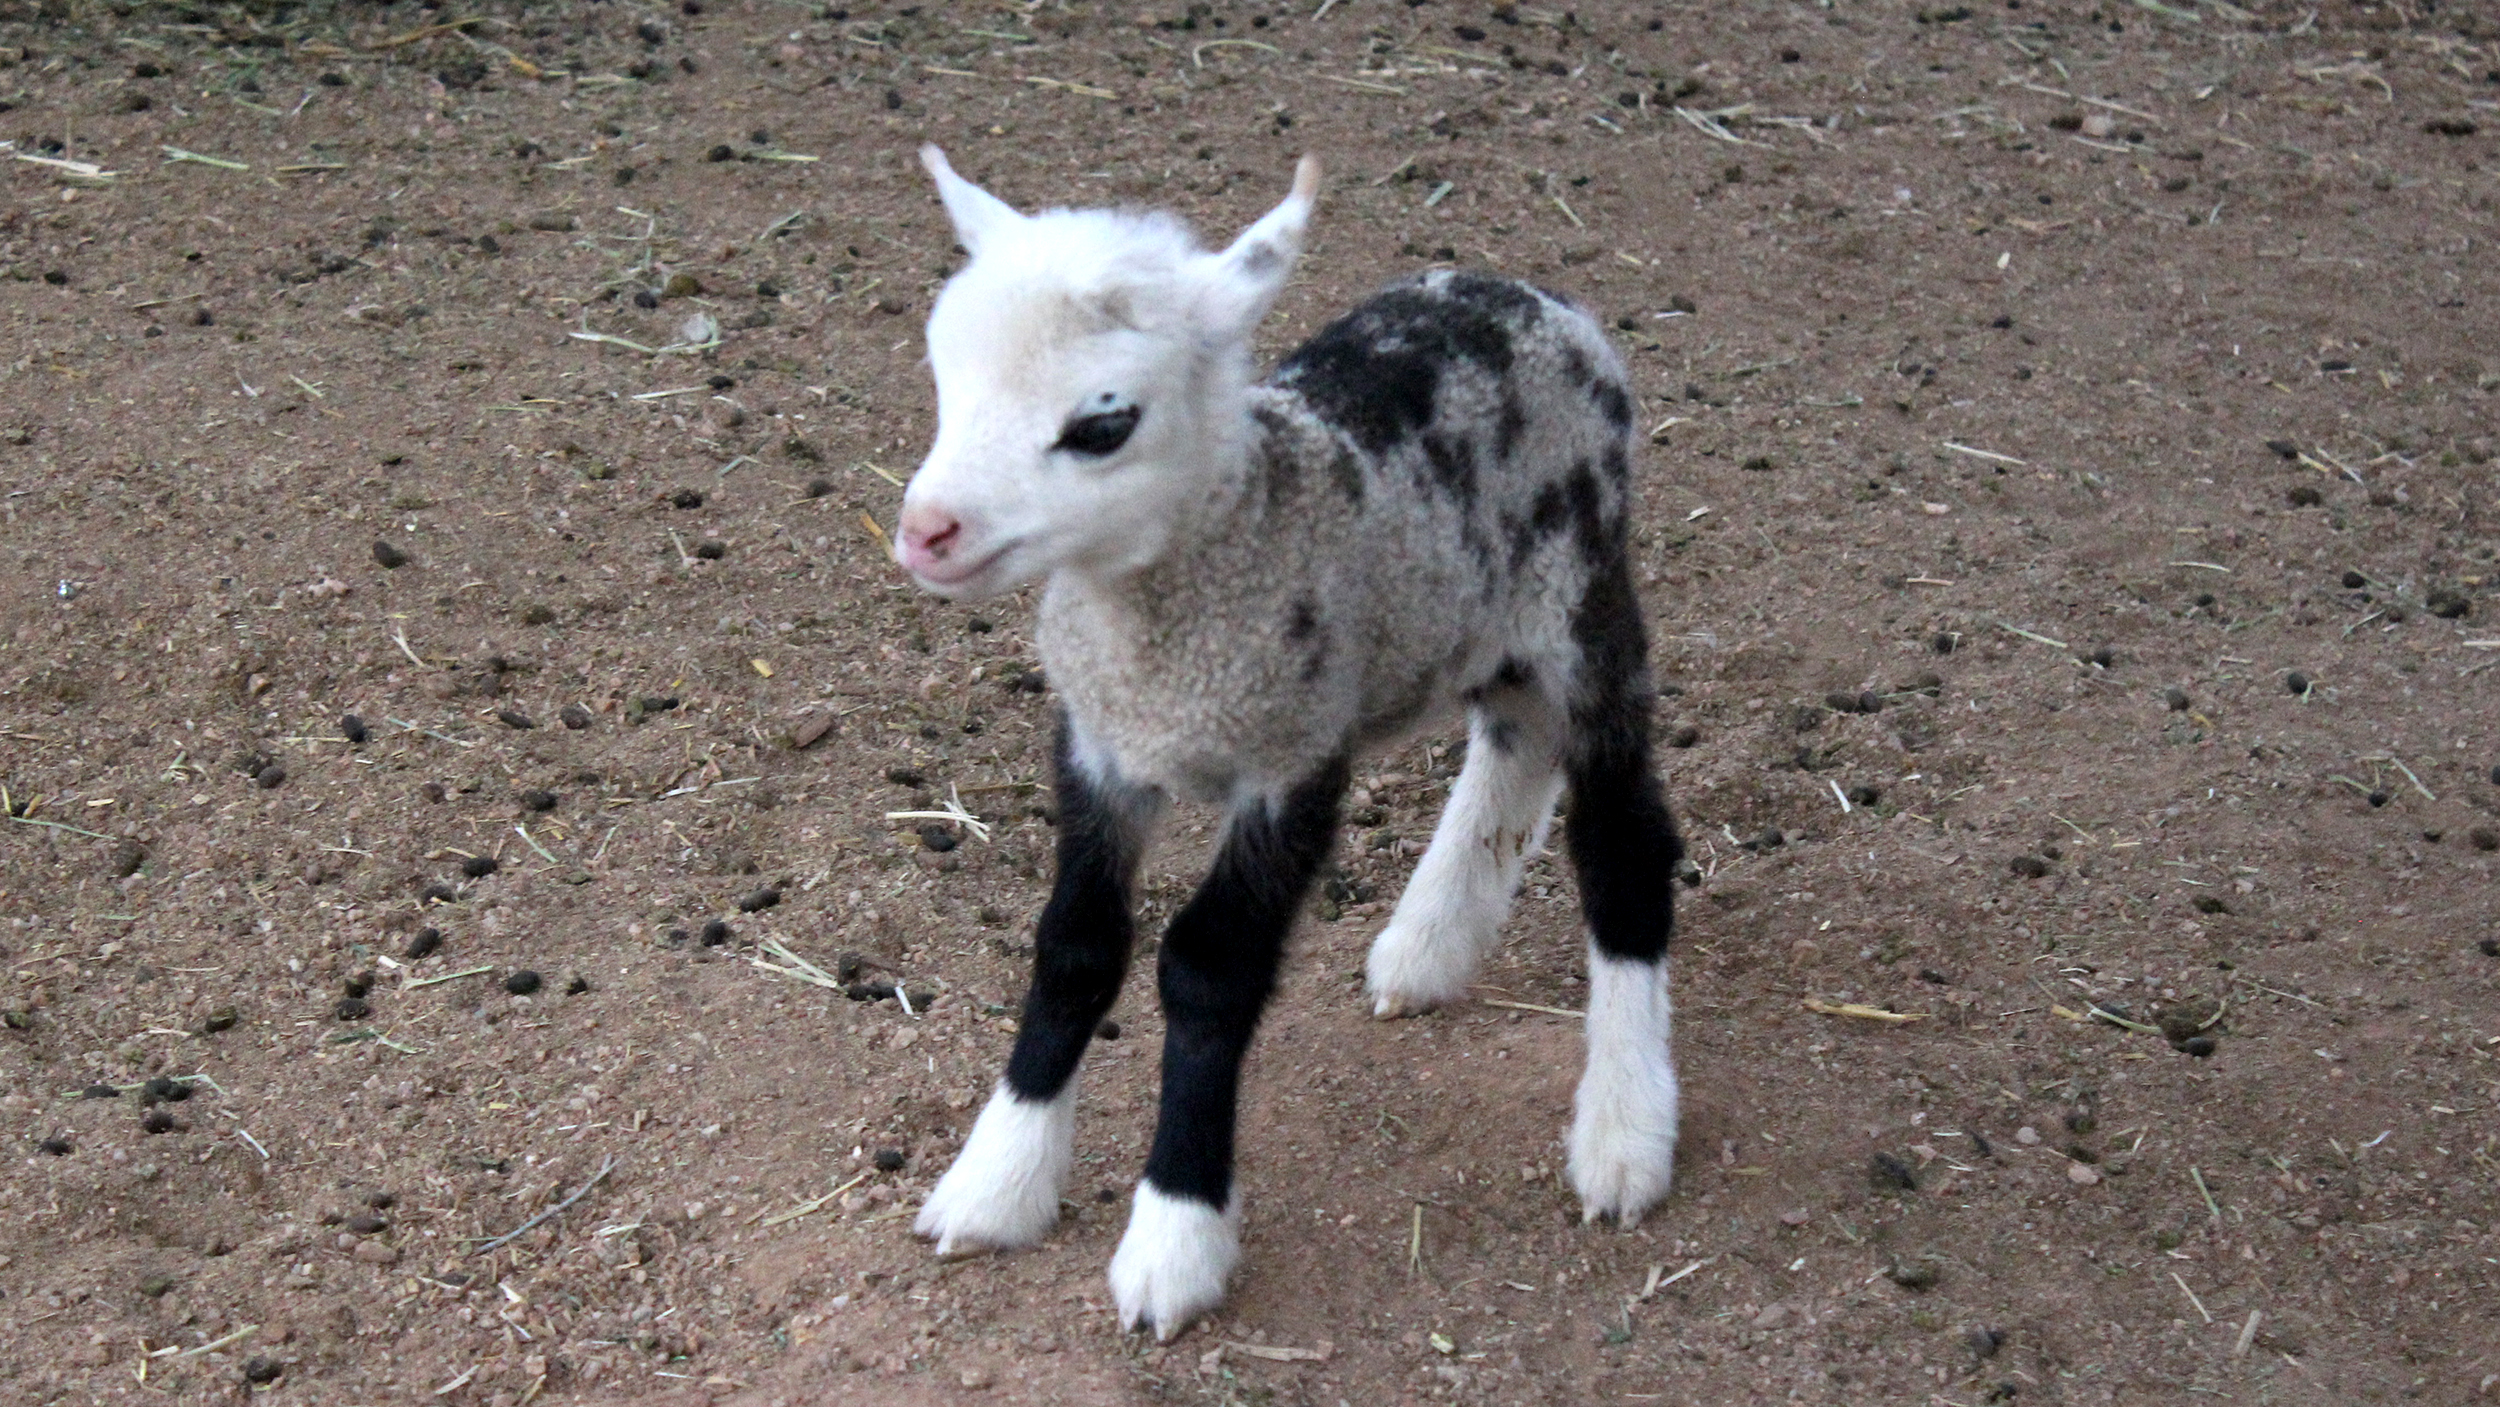 Baby geep, a cross between a goat and a sheep, is stealing hearts everywhere